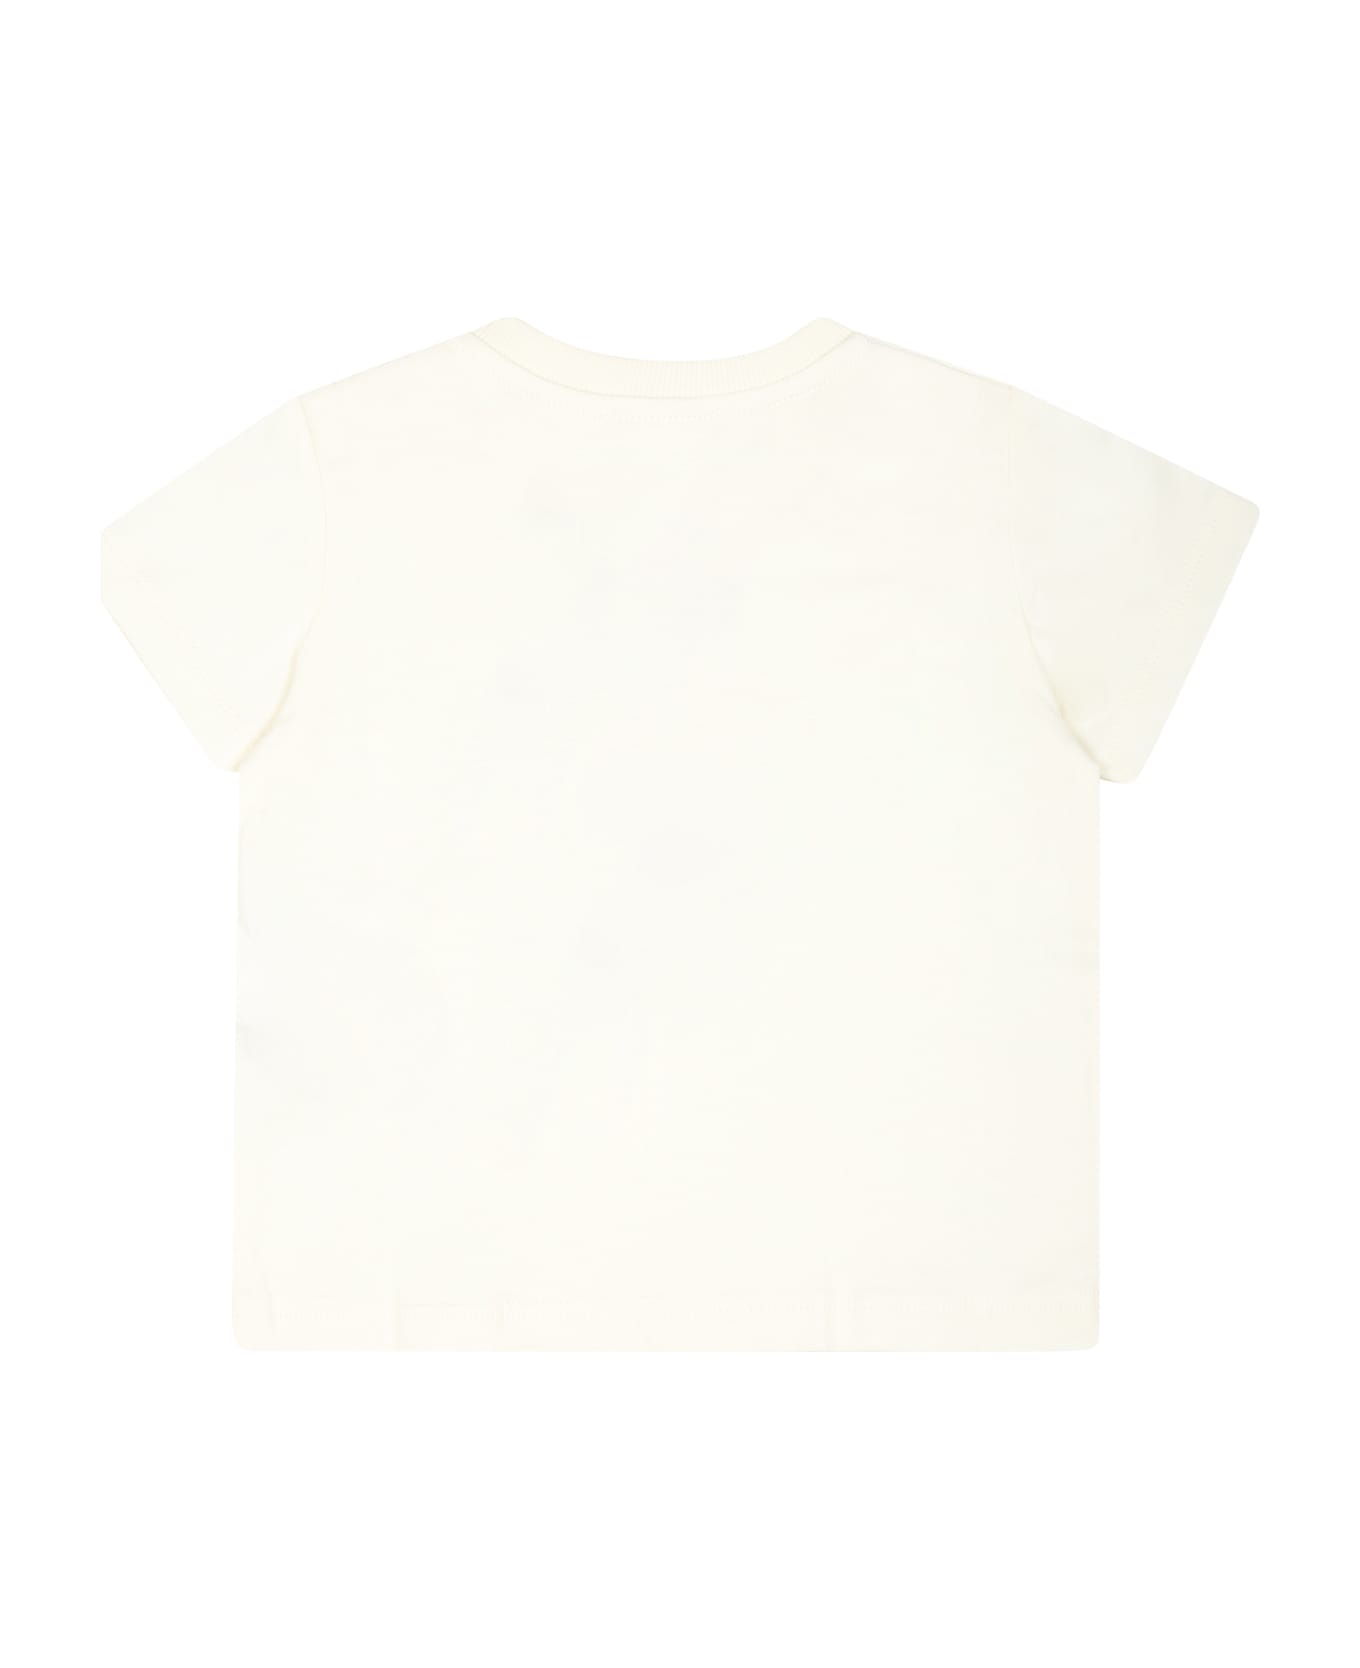 Moschino Ivory T-shirt For Baby Boy With Teddy Bear And Cactus - Ivory